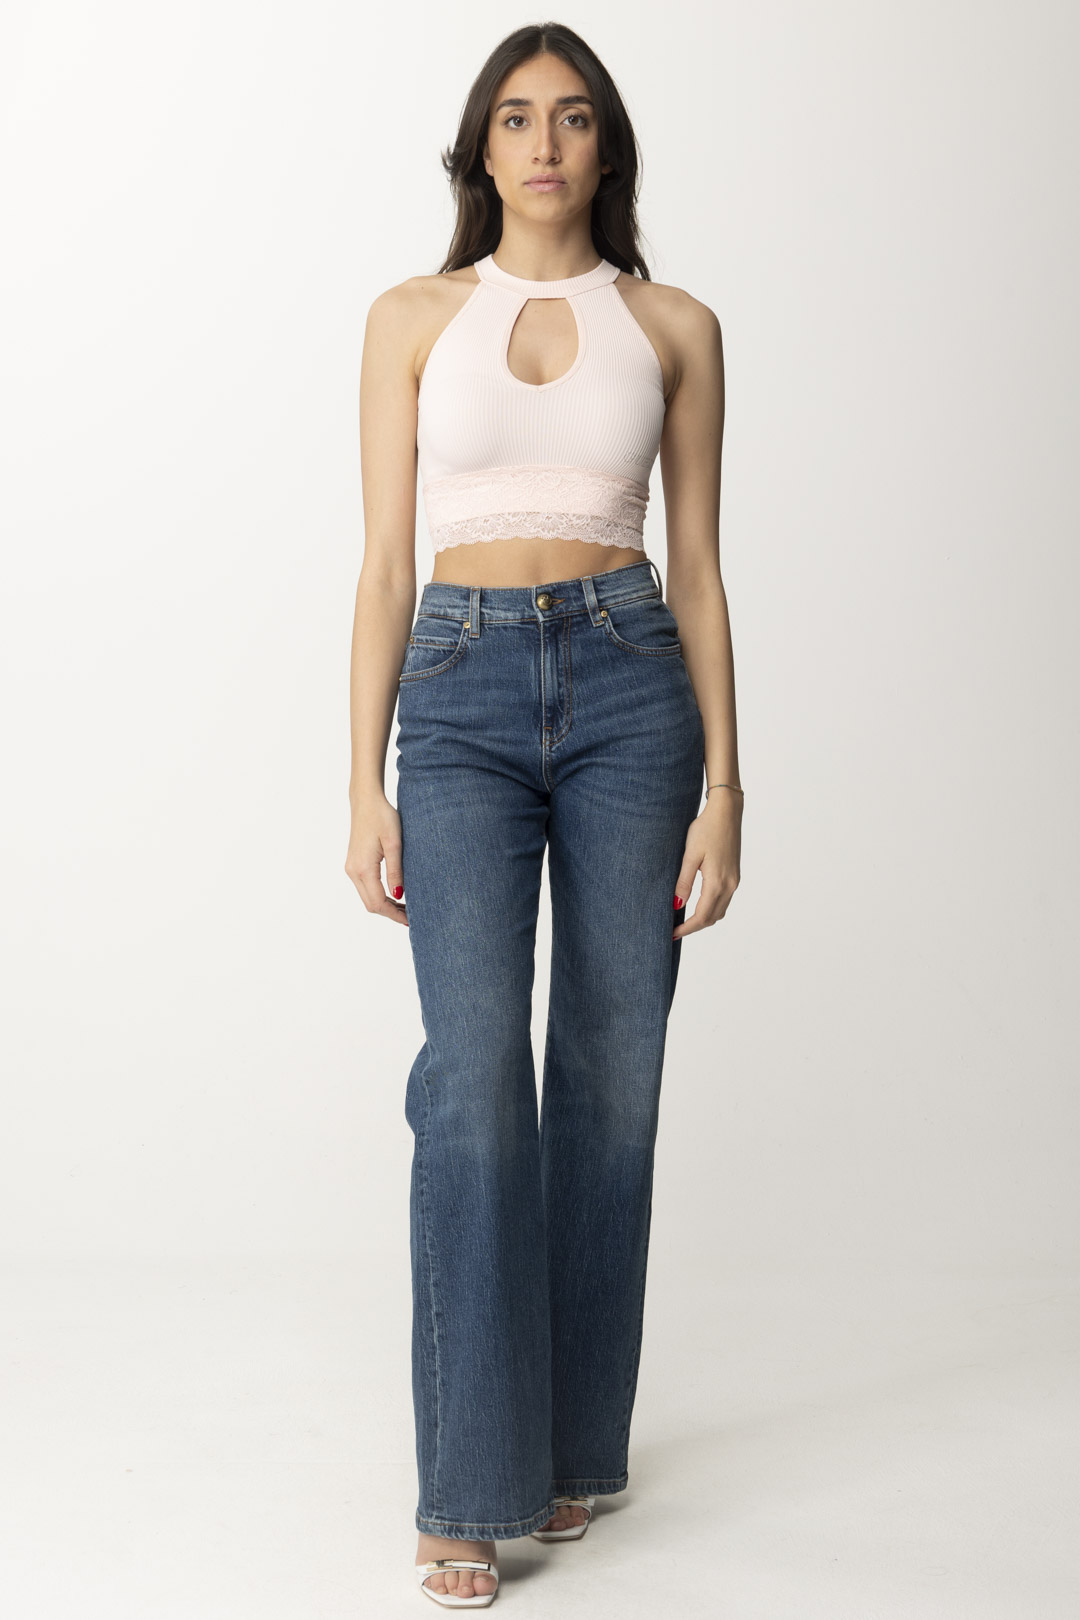 Preview: Guess Crop Top in Tricot with Lace Hem WANNA BE PINK